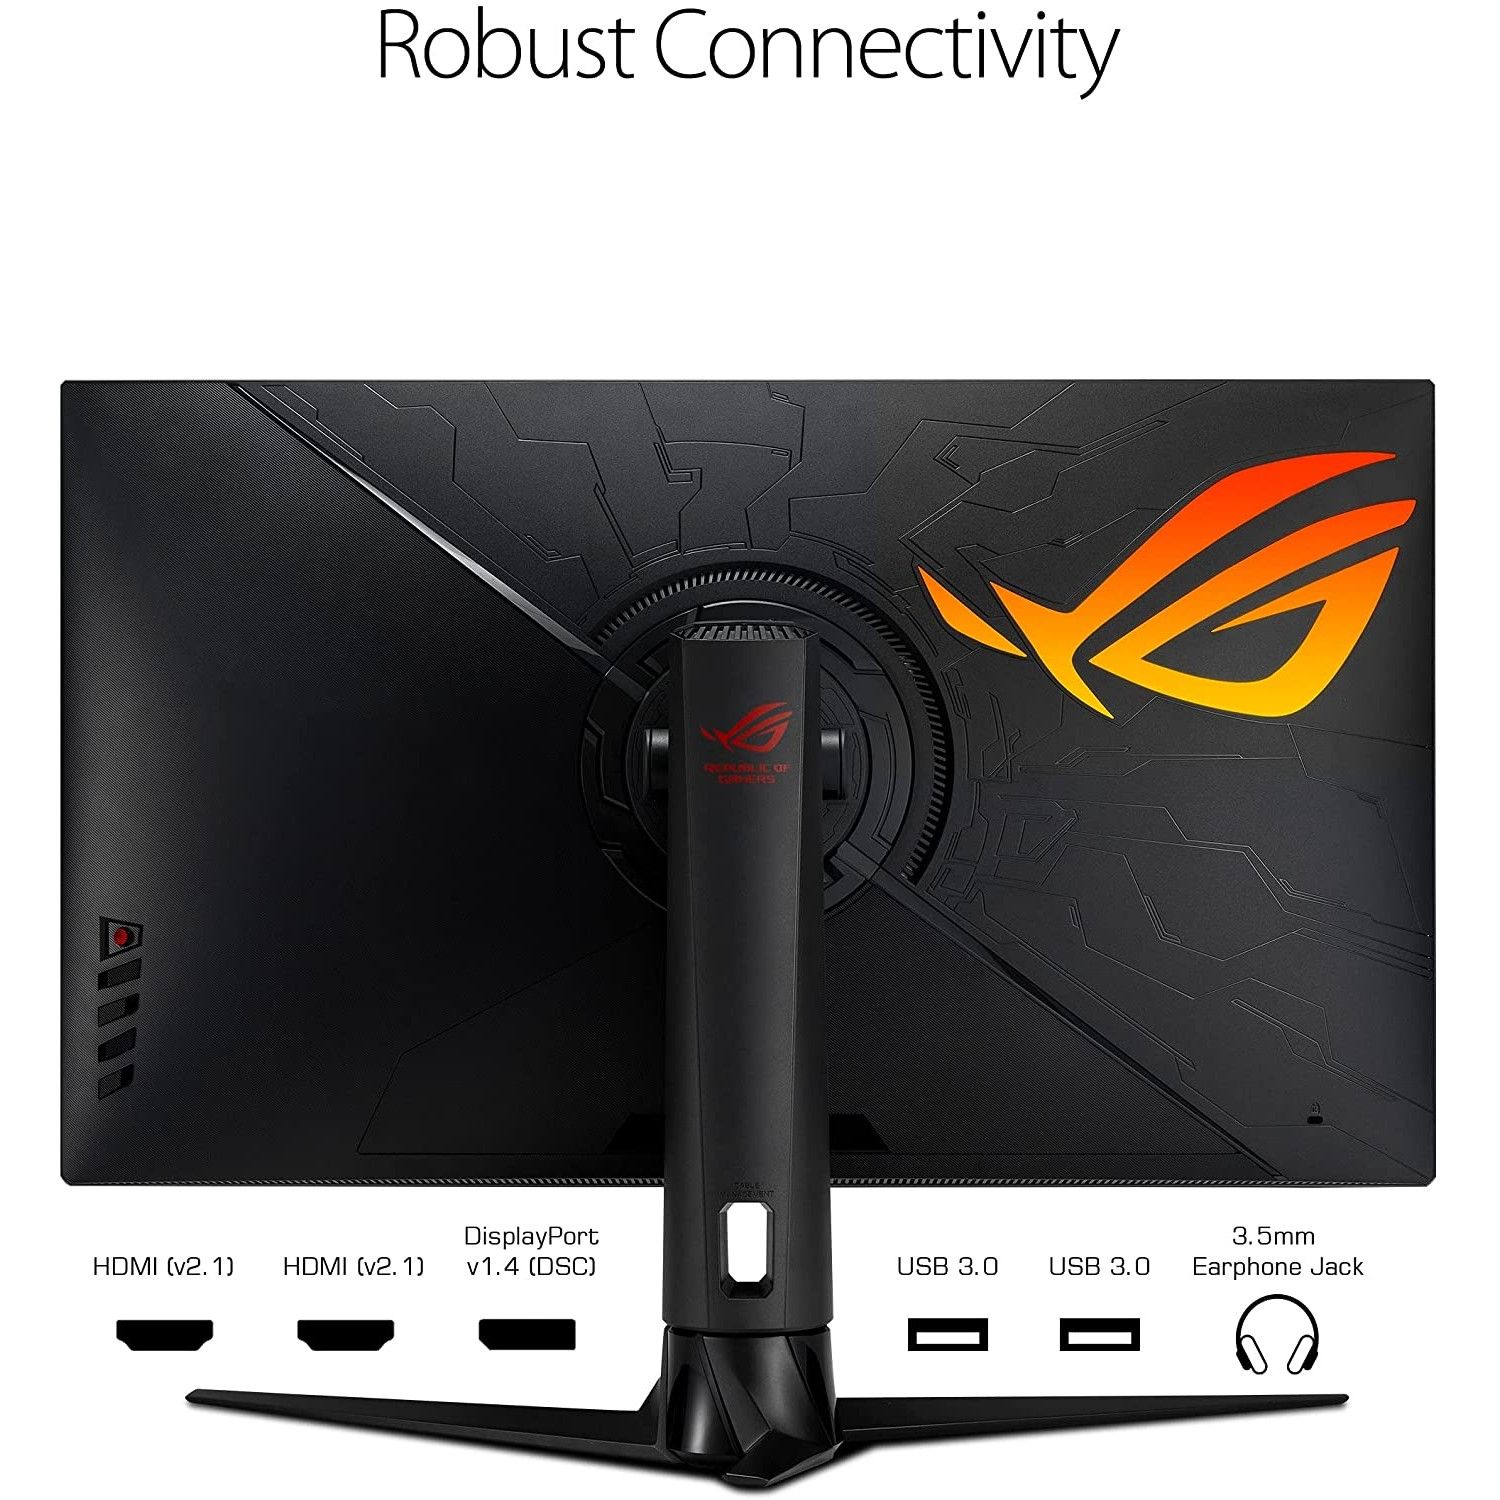 The ports and RGB lighting on the ASUS ROG Swift PG32UQ gaming monitor